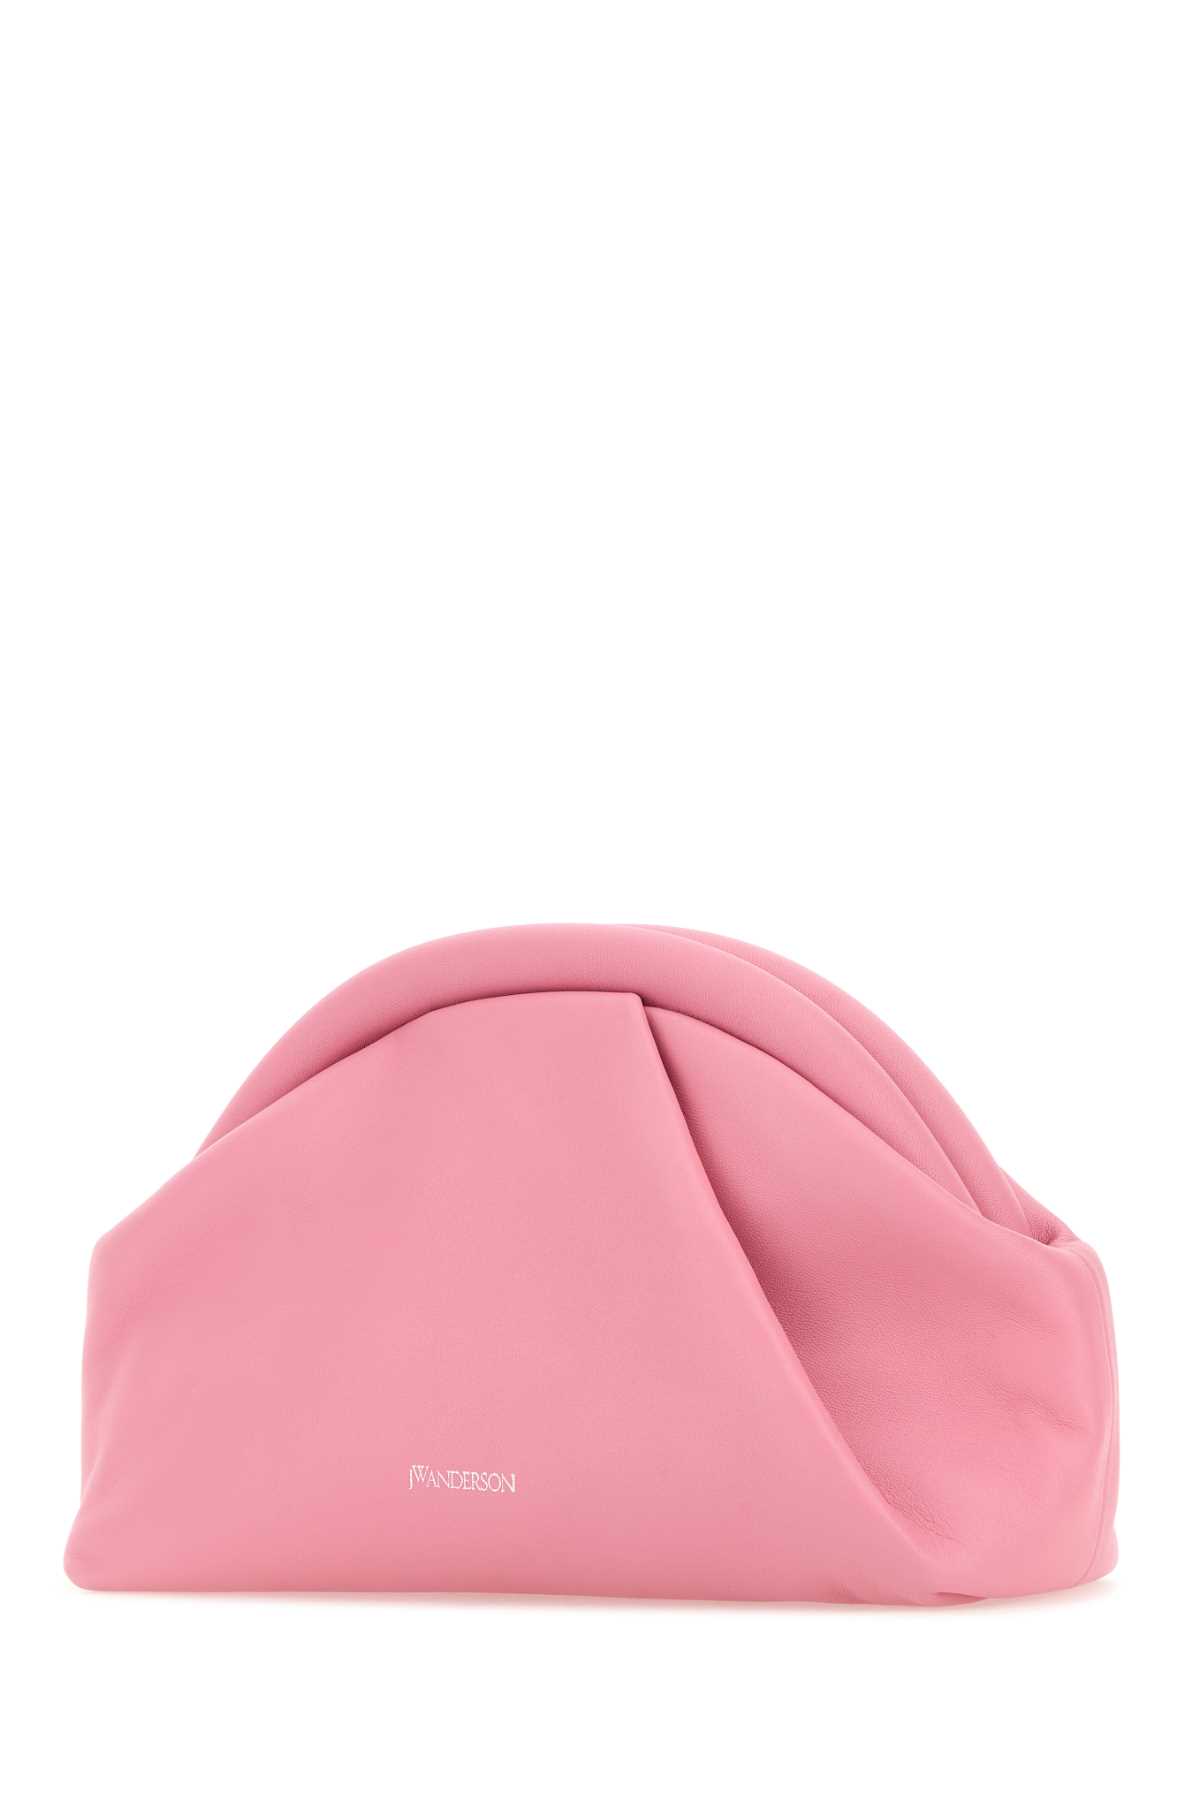 Jw Anderson Pink Leather The Bumper Clutch